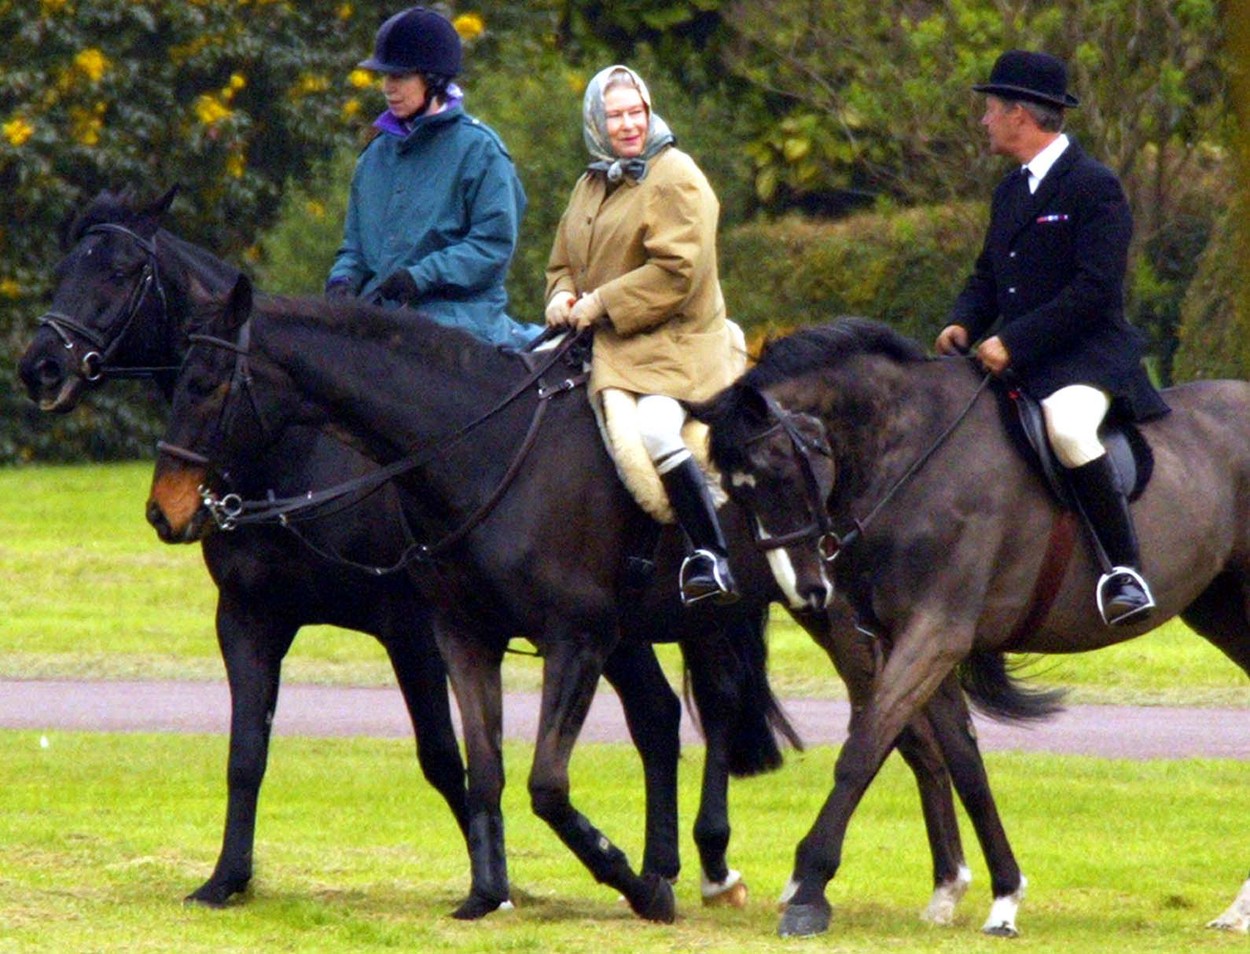 File photo dated 1/4/2002 of Queen Elizabeth II and her daughter, the Princess Royal, riding near Windsor Castle where members of the Royal family had gathered to mourn the death of Queen Elizabeth the Queen Mother, who died 30/3/02, aged 101. Horses, like dogs, were the Queen's lifelong love and she had an incredible knowledge of breeding and bloodlines. Whether it was racing thoroughbreds or ponies, she showed an unfailing interest. Issue date: Thursday September 8, 2022.,Image: 657658515, License: Rights-managed, Restrictions: File photo, Model Release: no